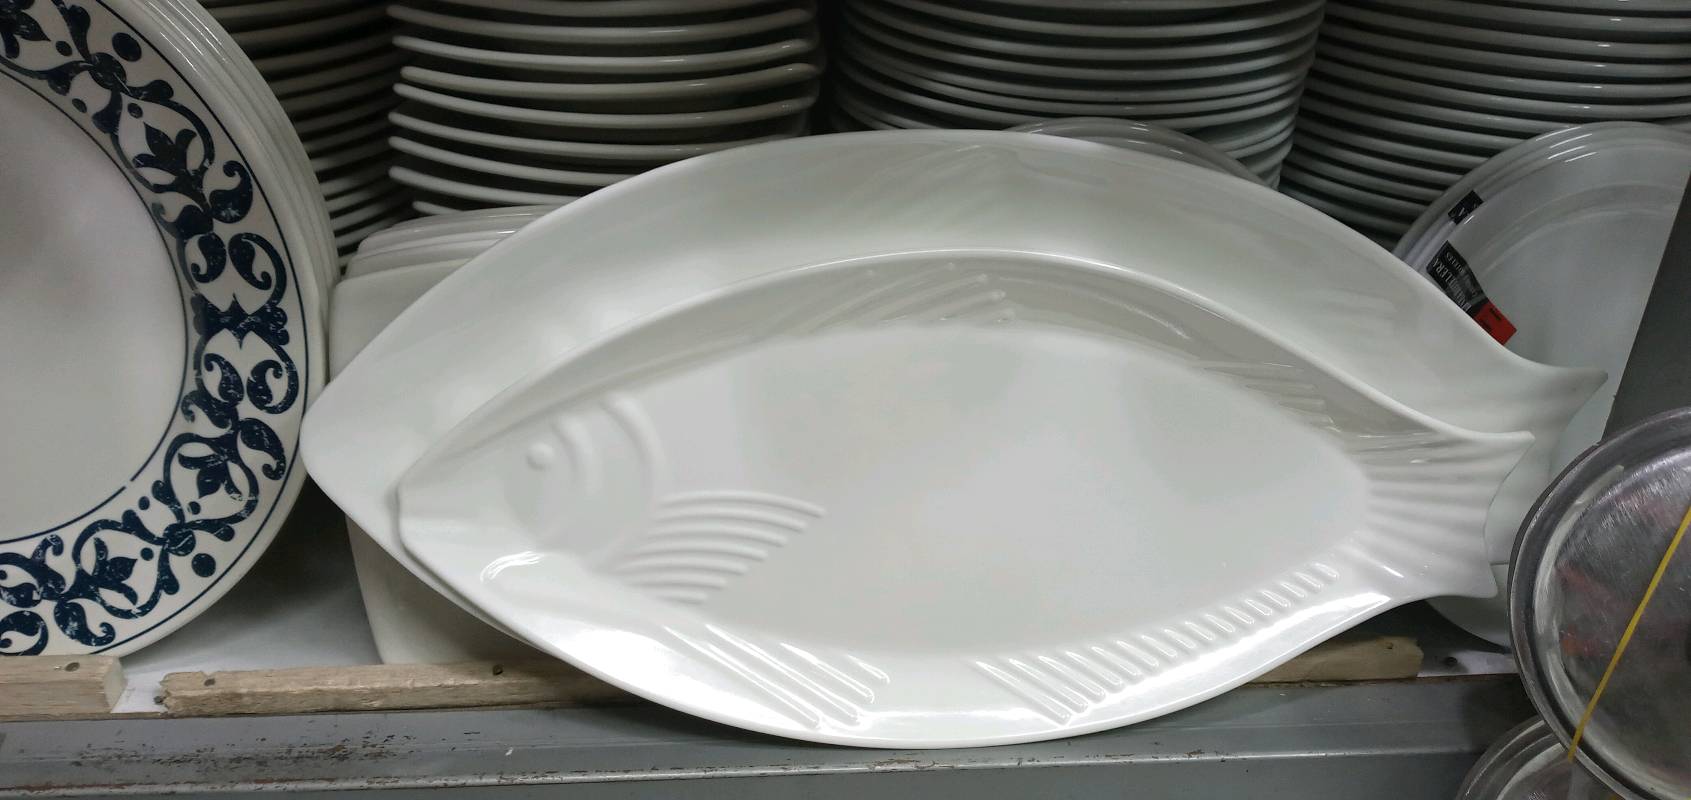 plate_rack, mixing_bowl, ladle